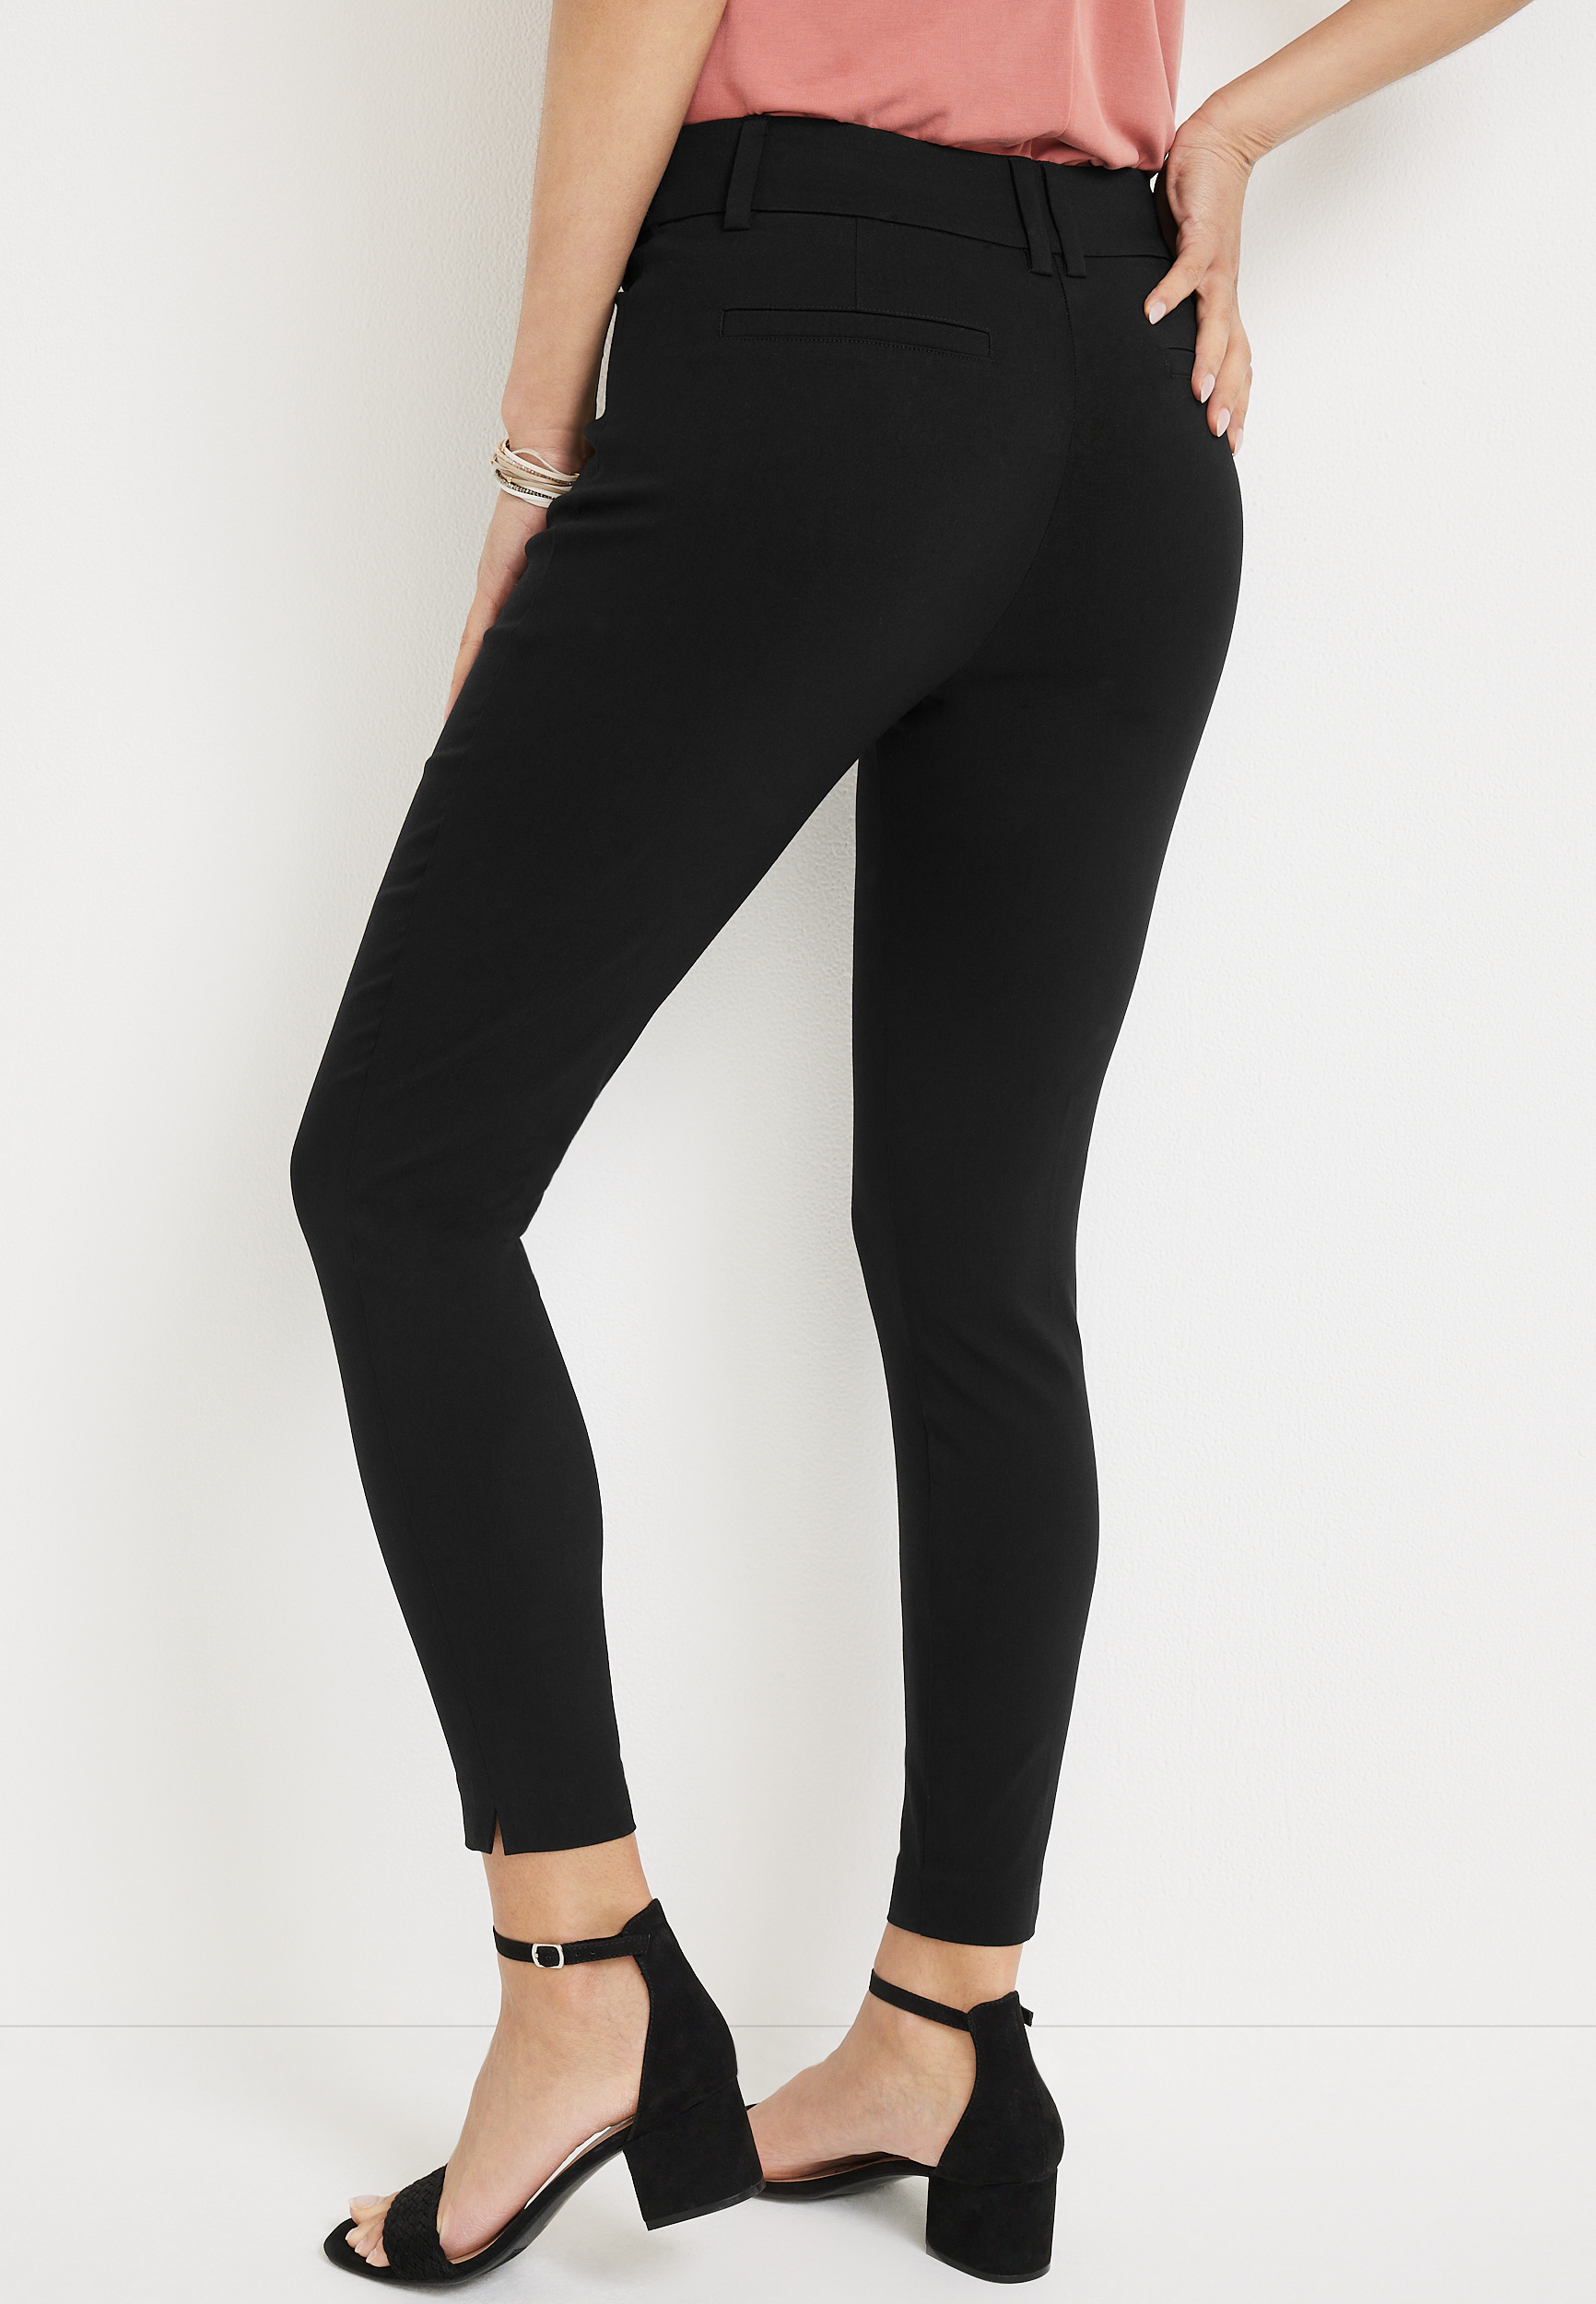 Maurices Pull On Bengaline Skinny Ankle Dress Pant